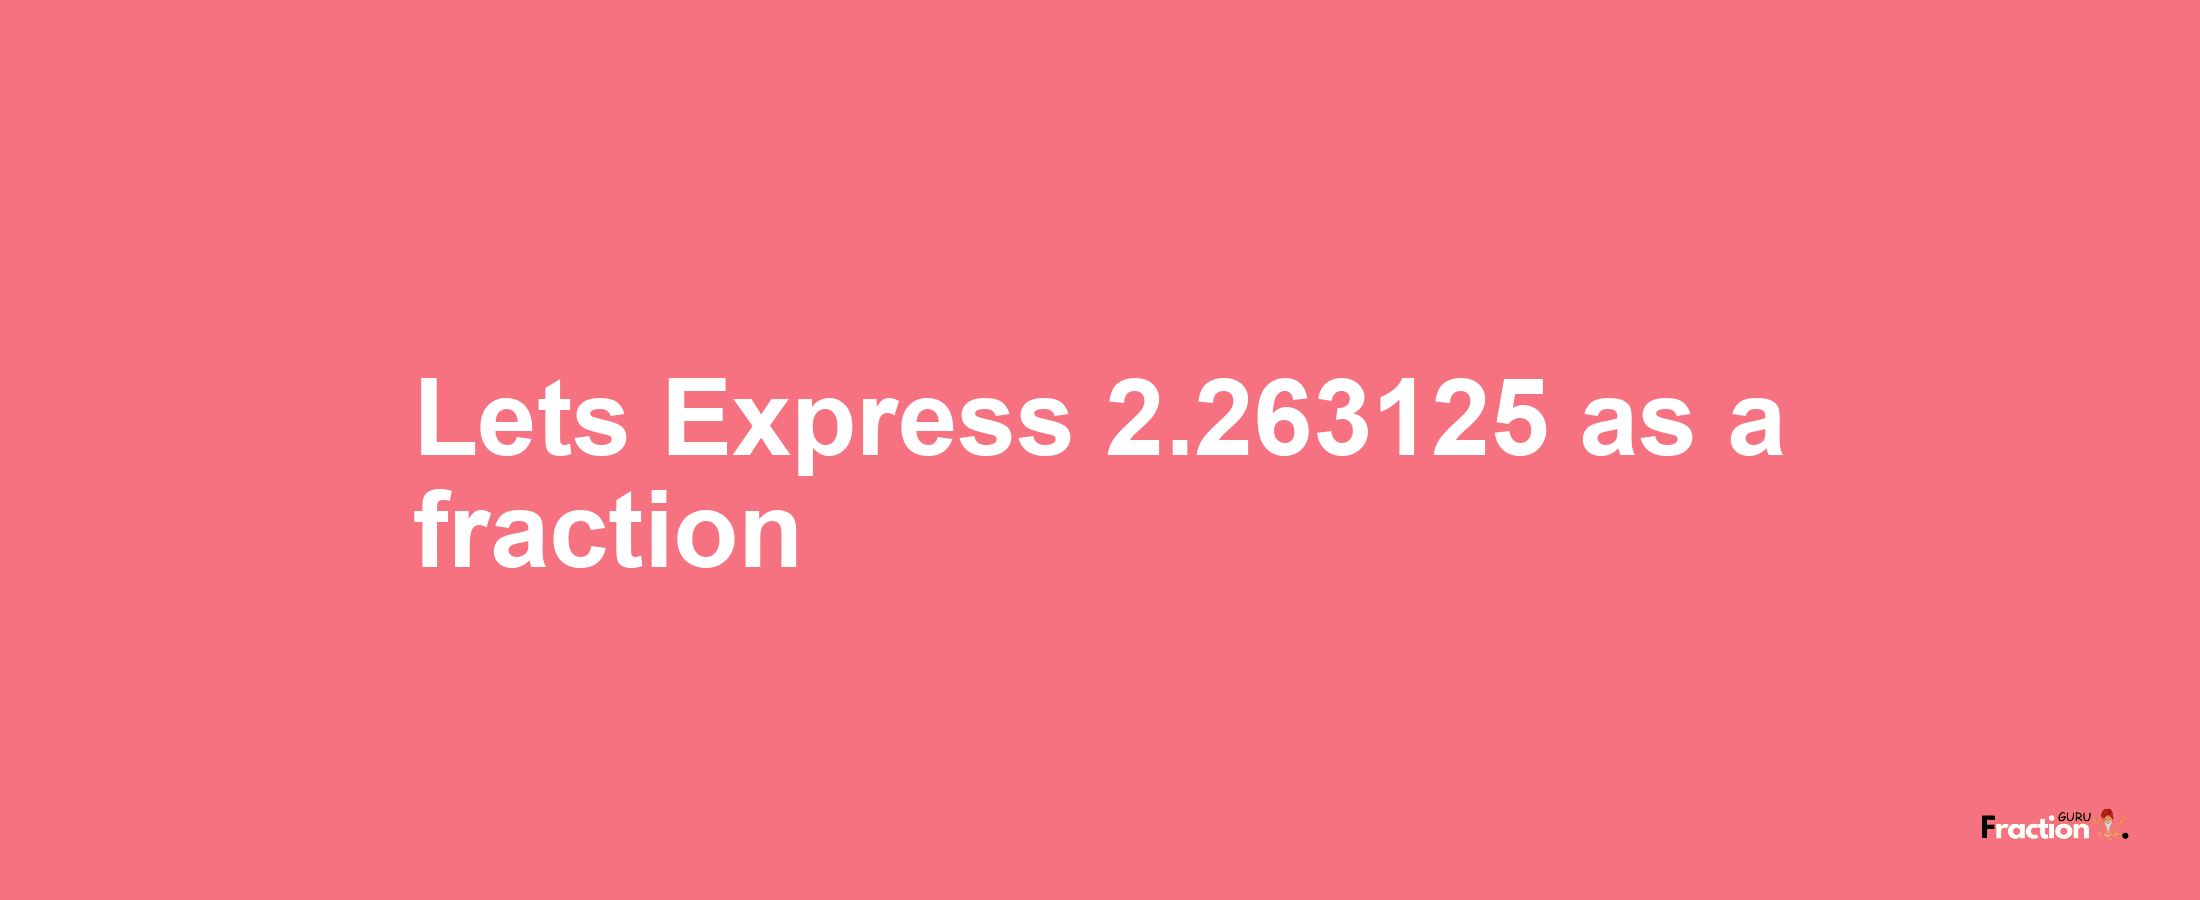 Lets Express 2.263125 as afraction